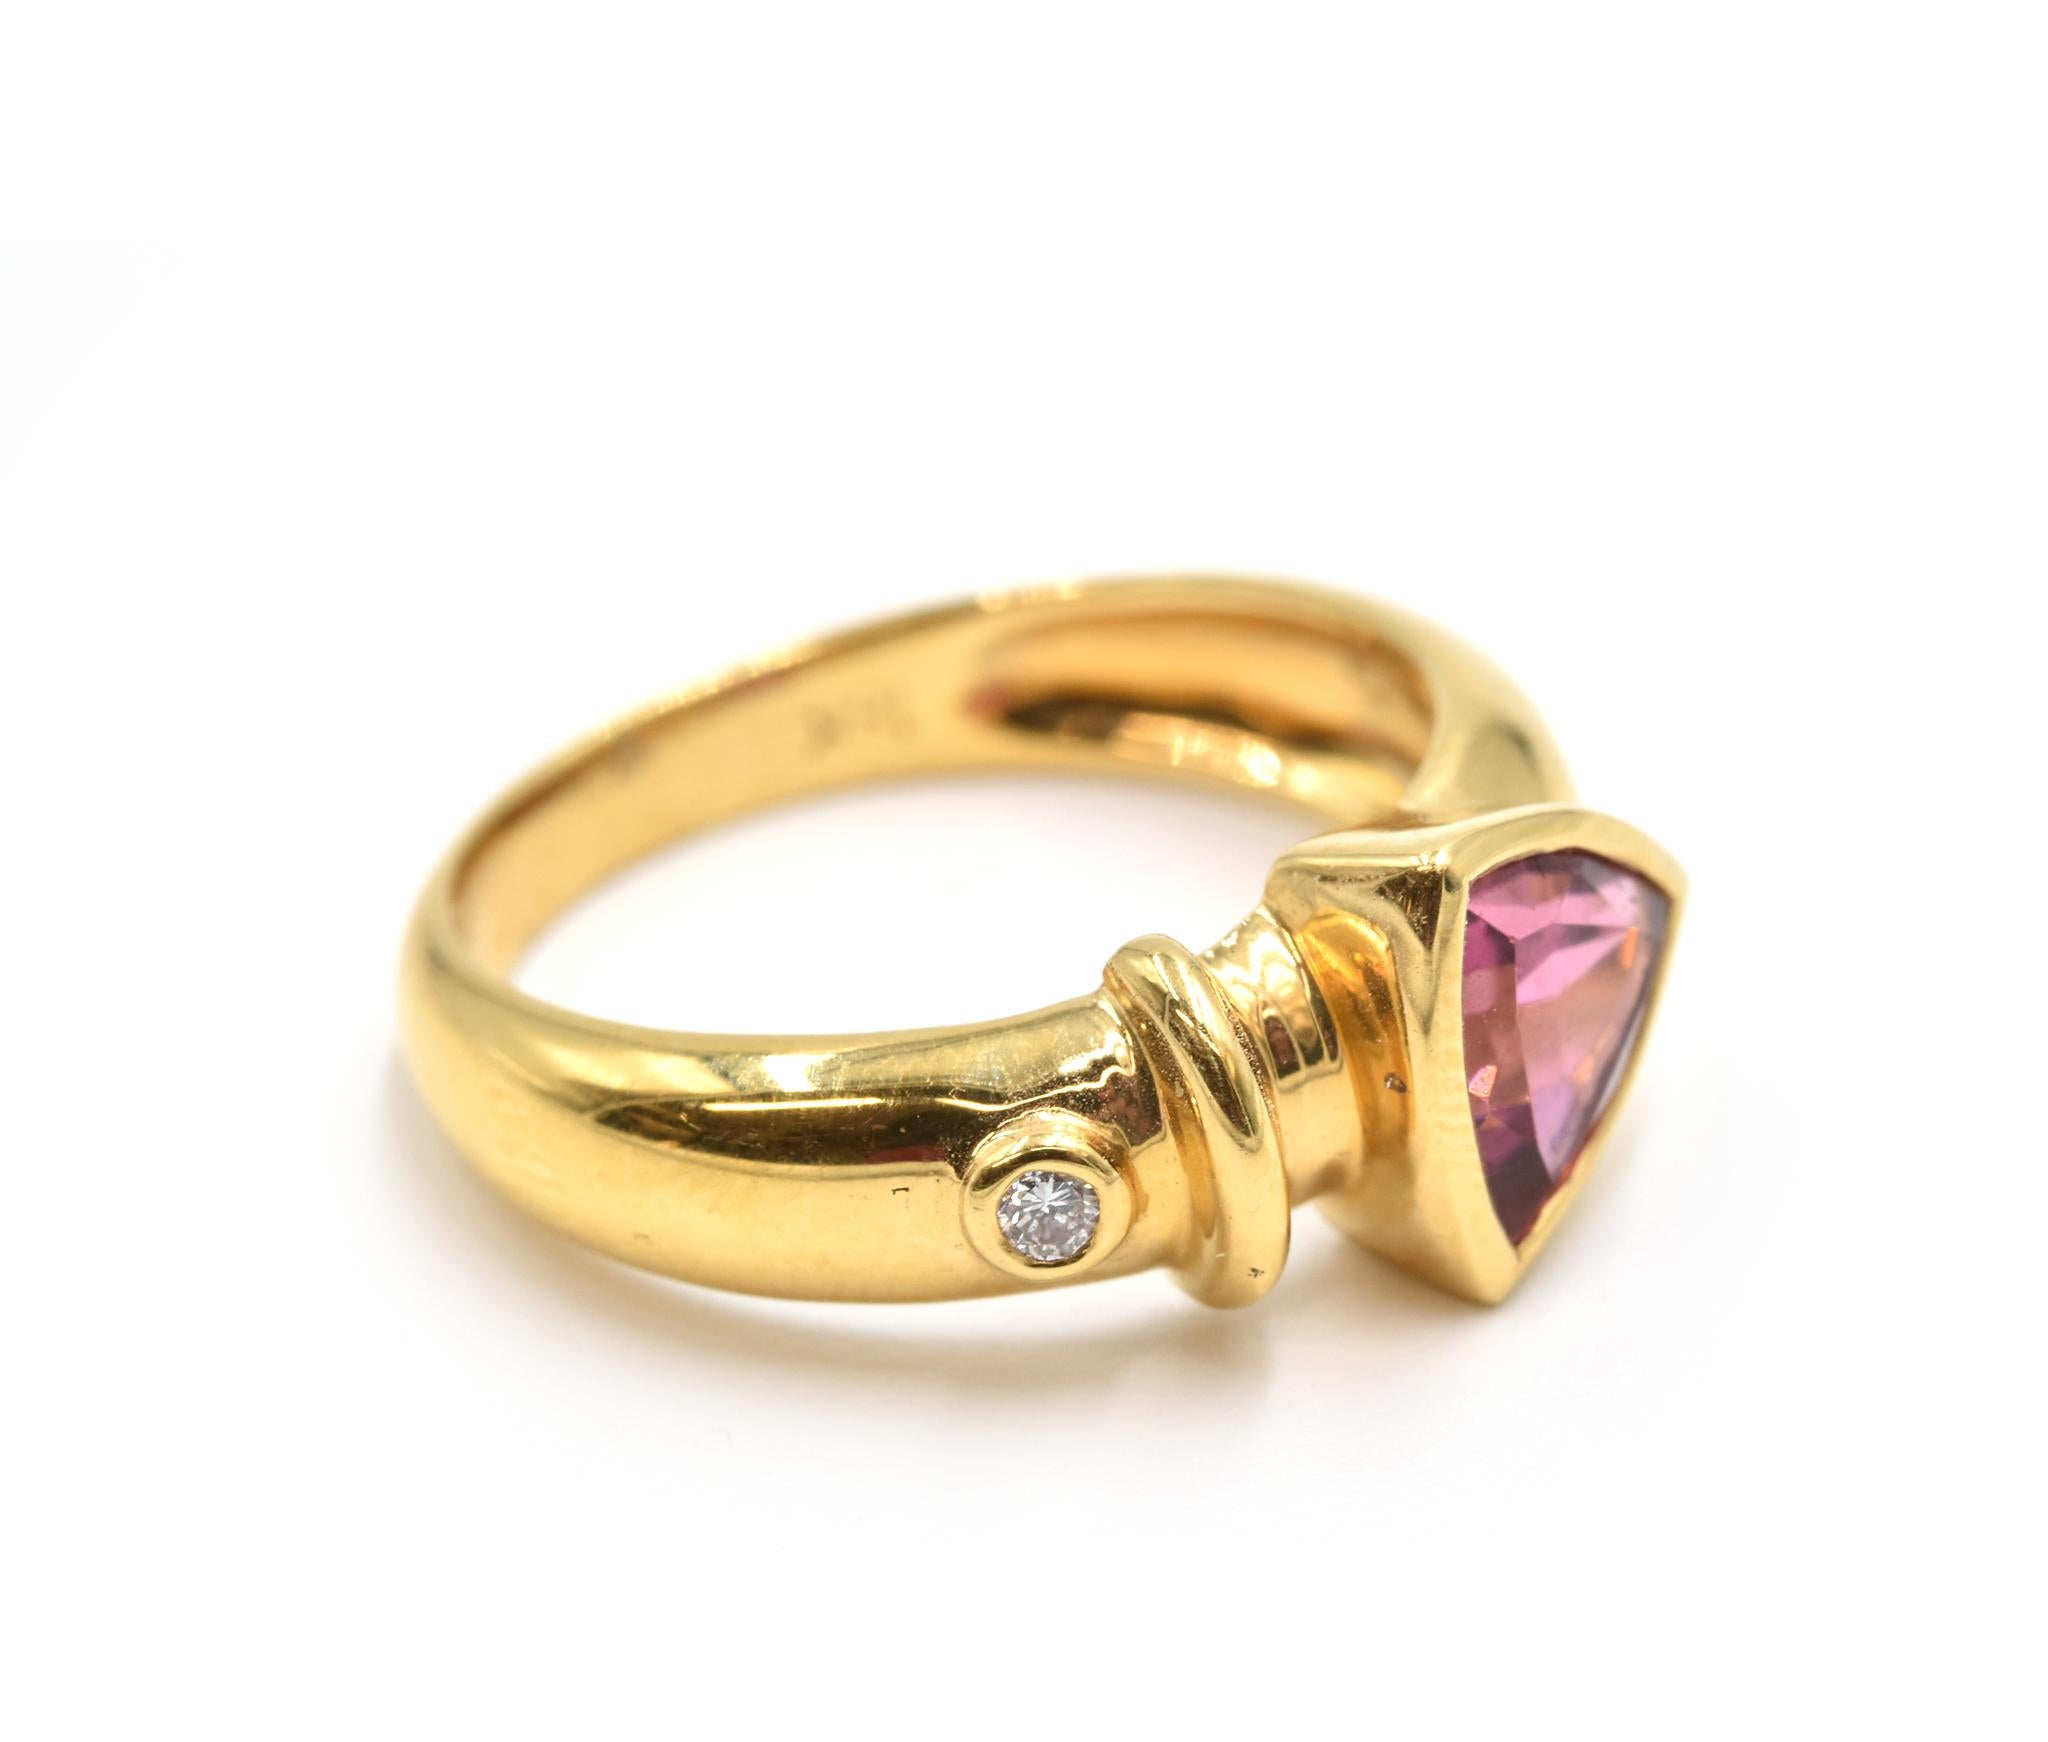 Designer: custom design
Material: 18k yellow gold
Pink Tourmaline: trillion cut 2.00 carat pink tourmaline gemstone
Diamonds: 0.03 carat total weight
Dimensions: ring top measures 1/4-inch long
Ring Size: 6 3/4 (please allow two additional shipping